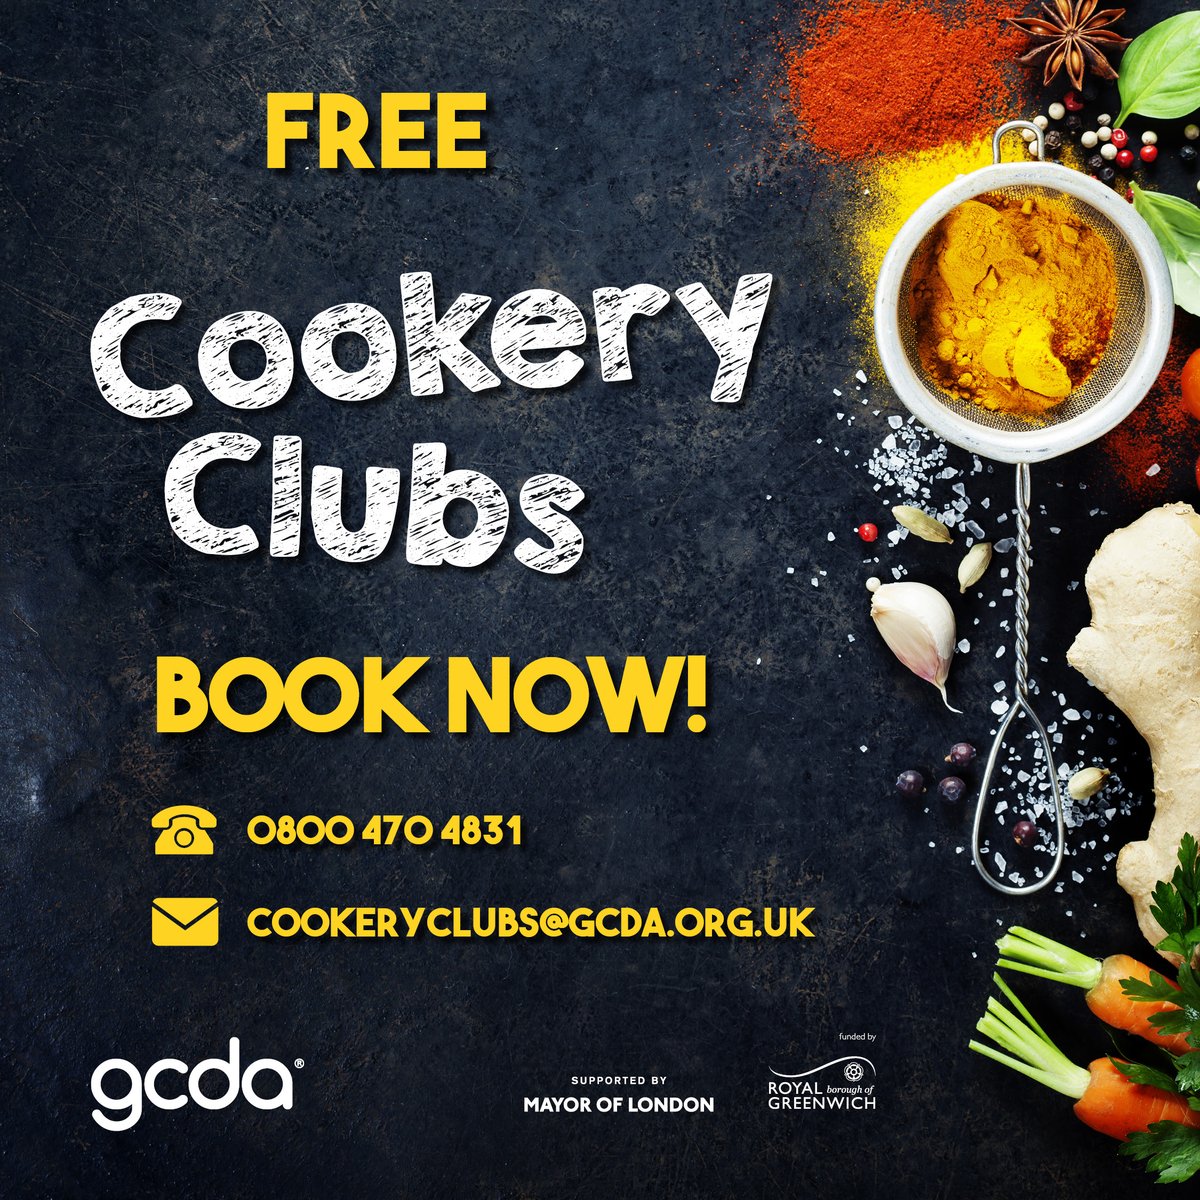 The FREE Cookery Clubs are back! Eat well for less, meet new people, learn fresh skills! Details for venues: gcda.coop/cookery-clubs/